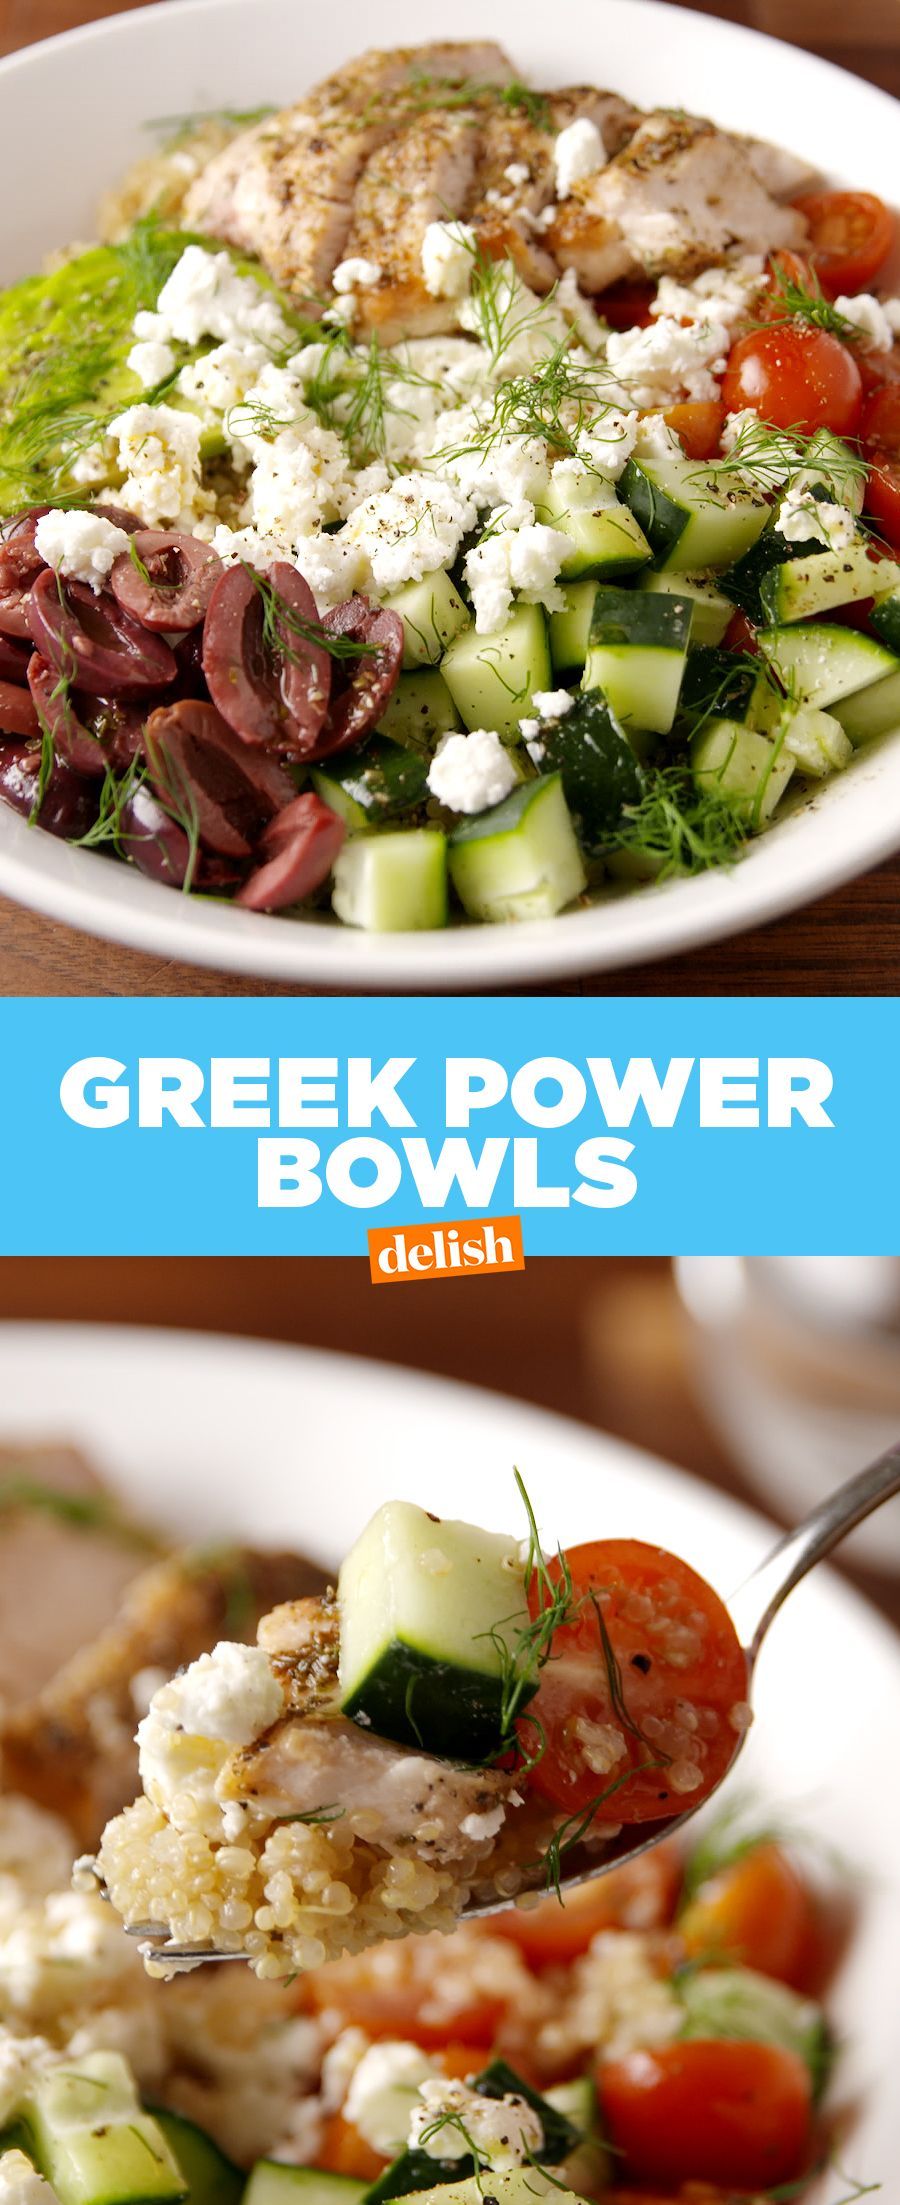 Truly the only thing you need to power through this week. Get the recipe at Delish.com.